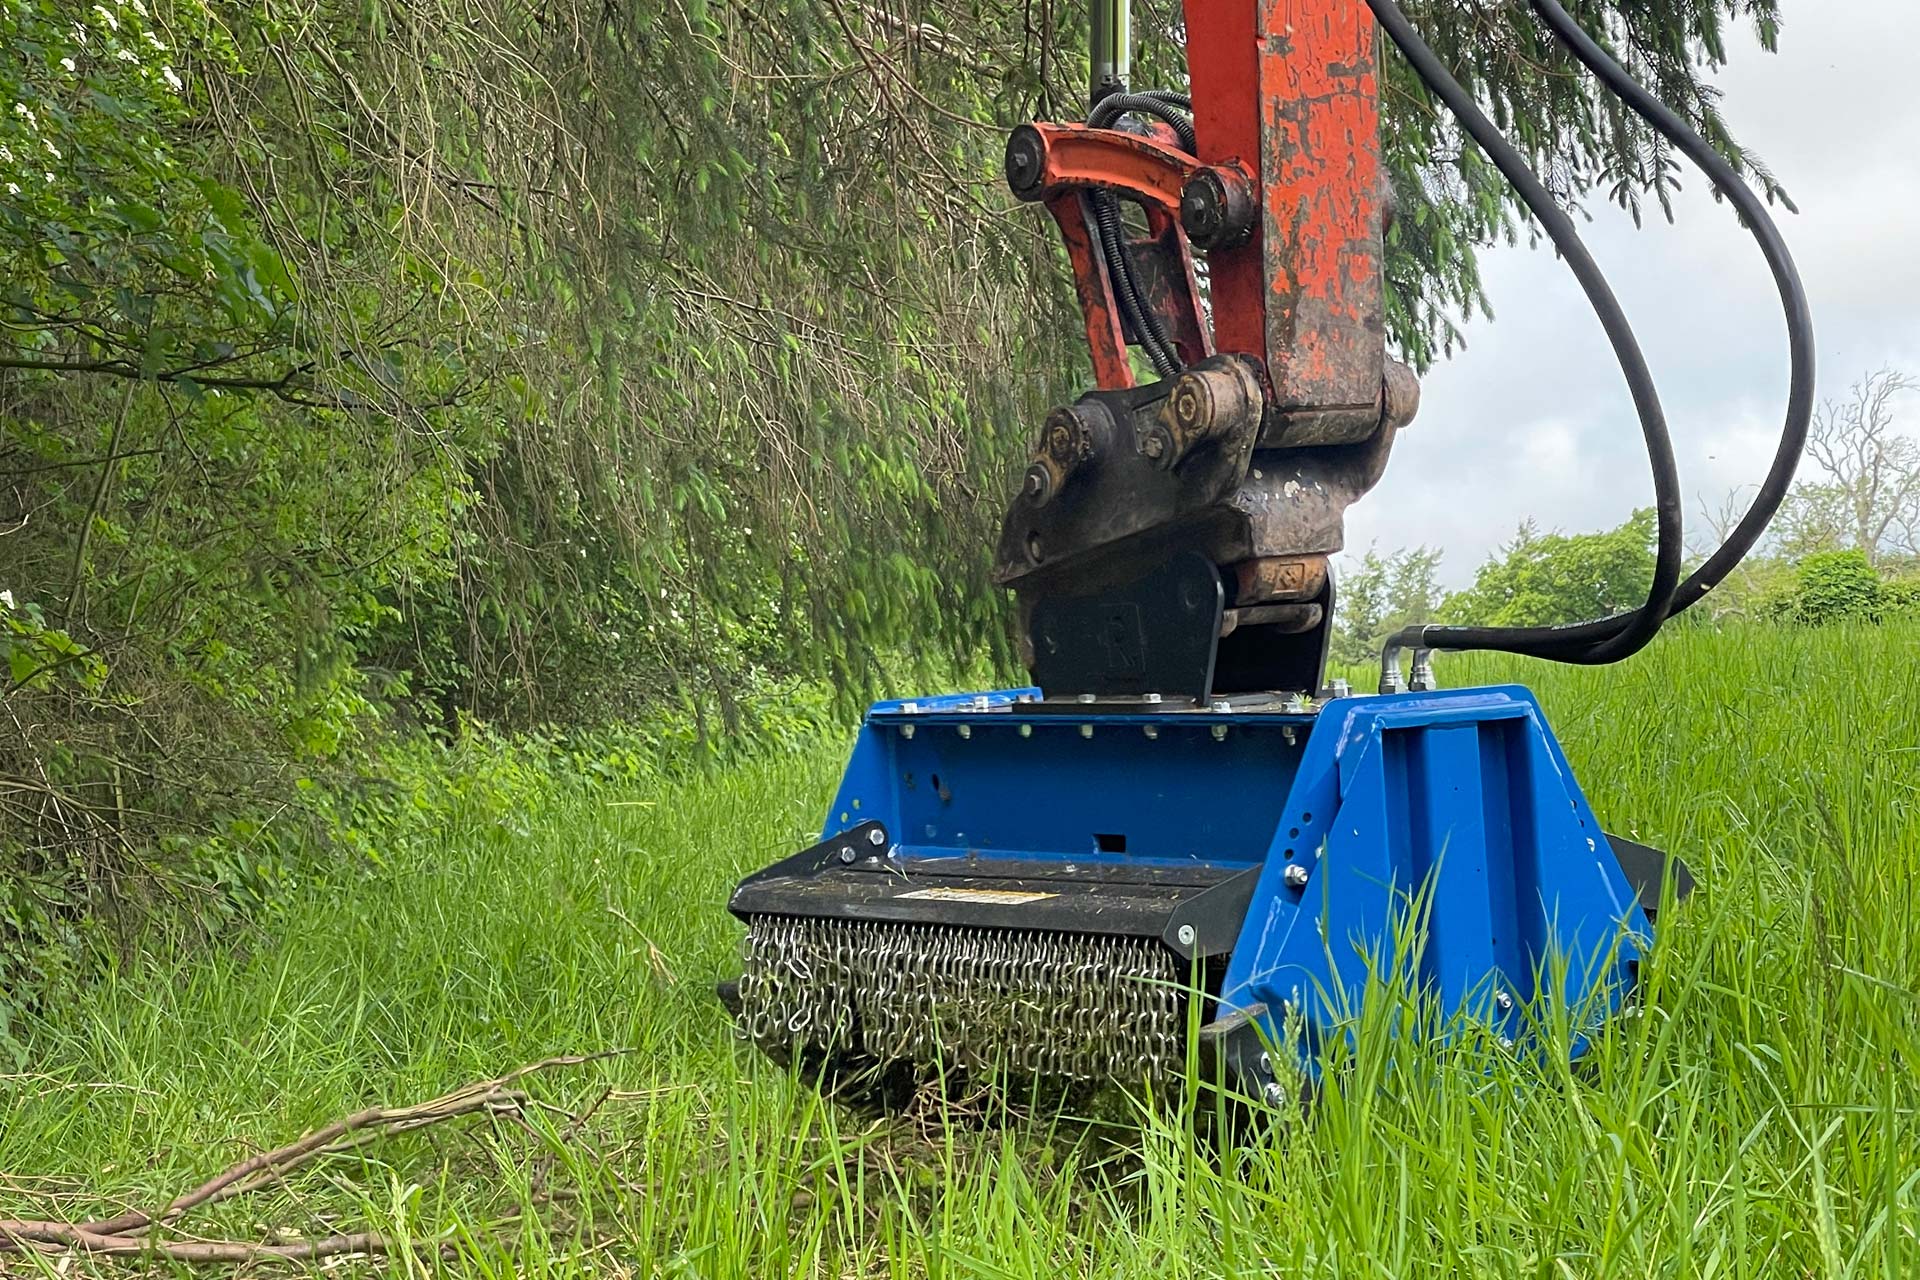 LS5 1000 Clearing grass and tree branches.